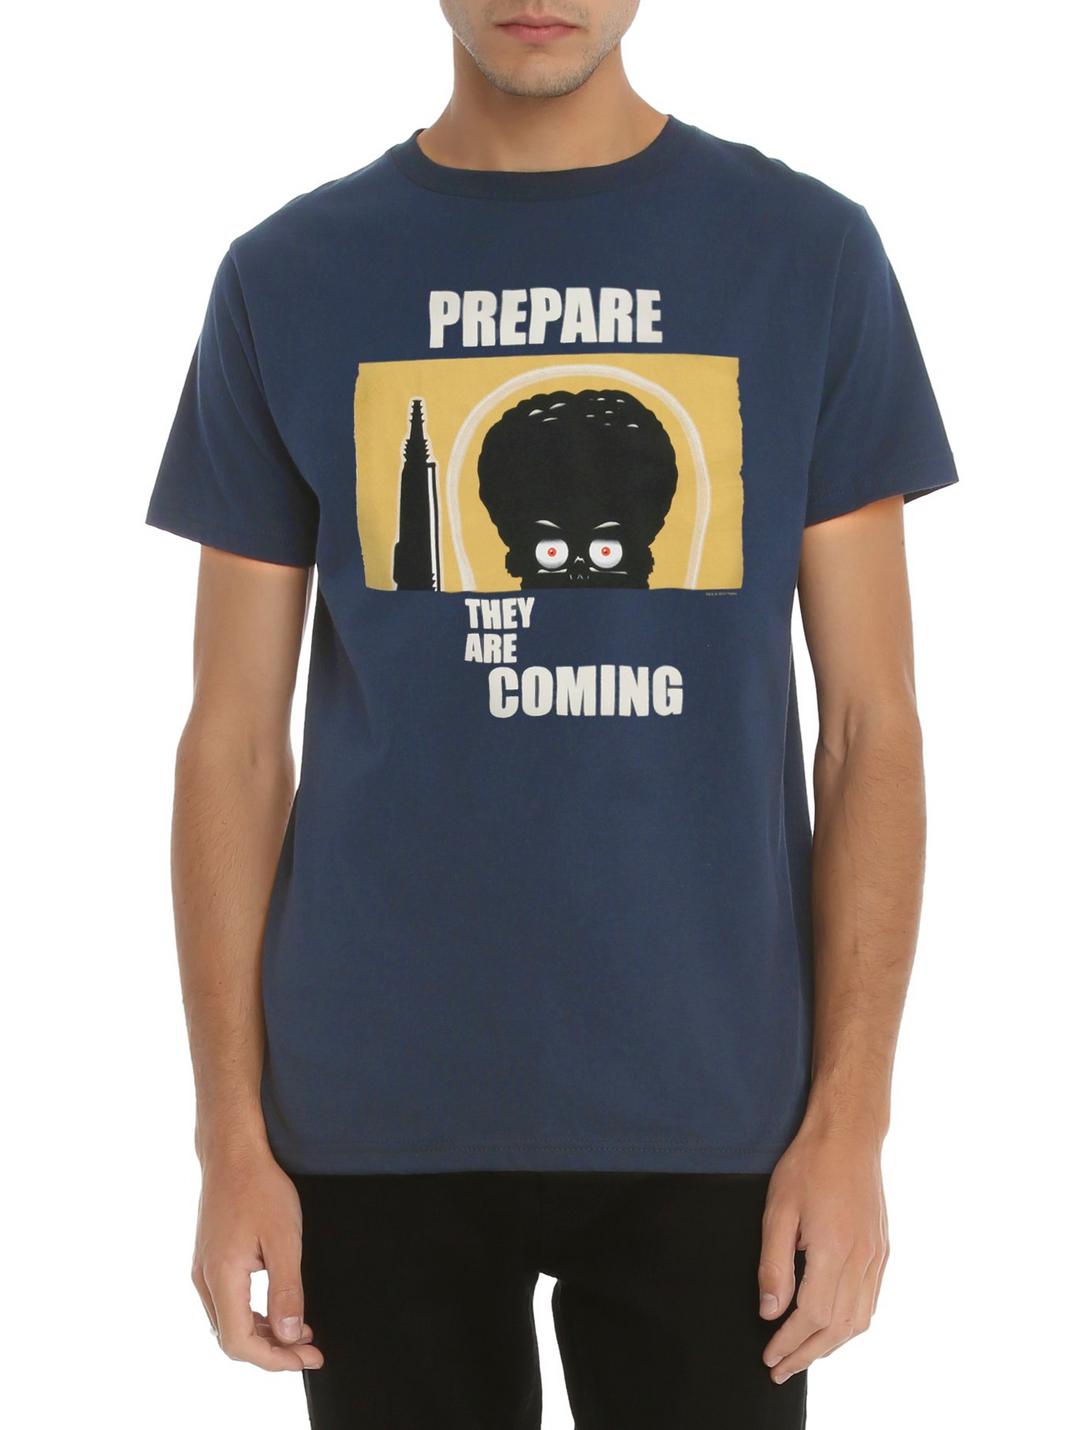 Mars Attacks Prepare They Are Coming T-Shirt, , hi-res